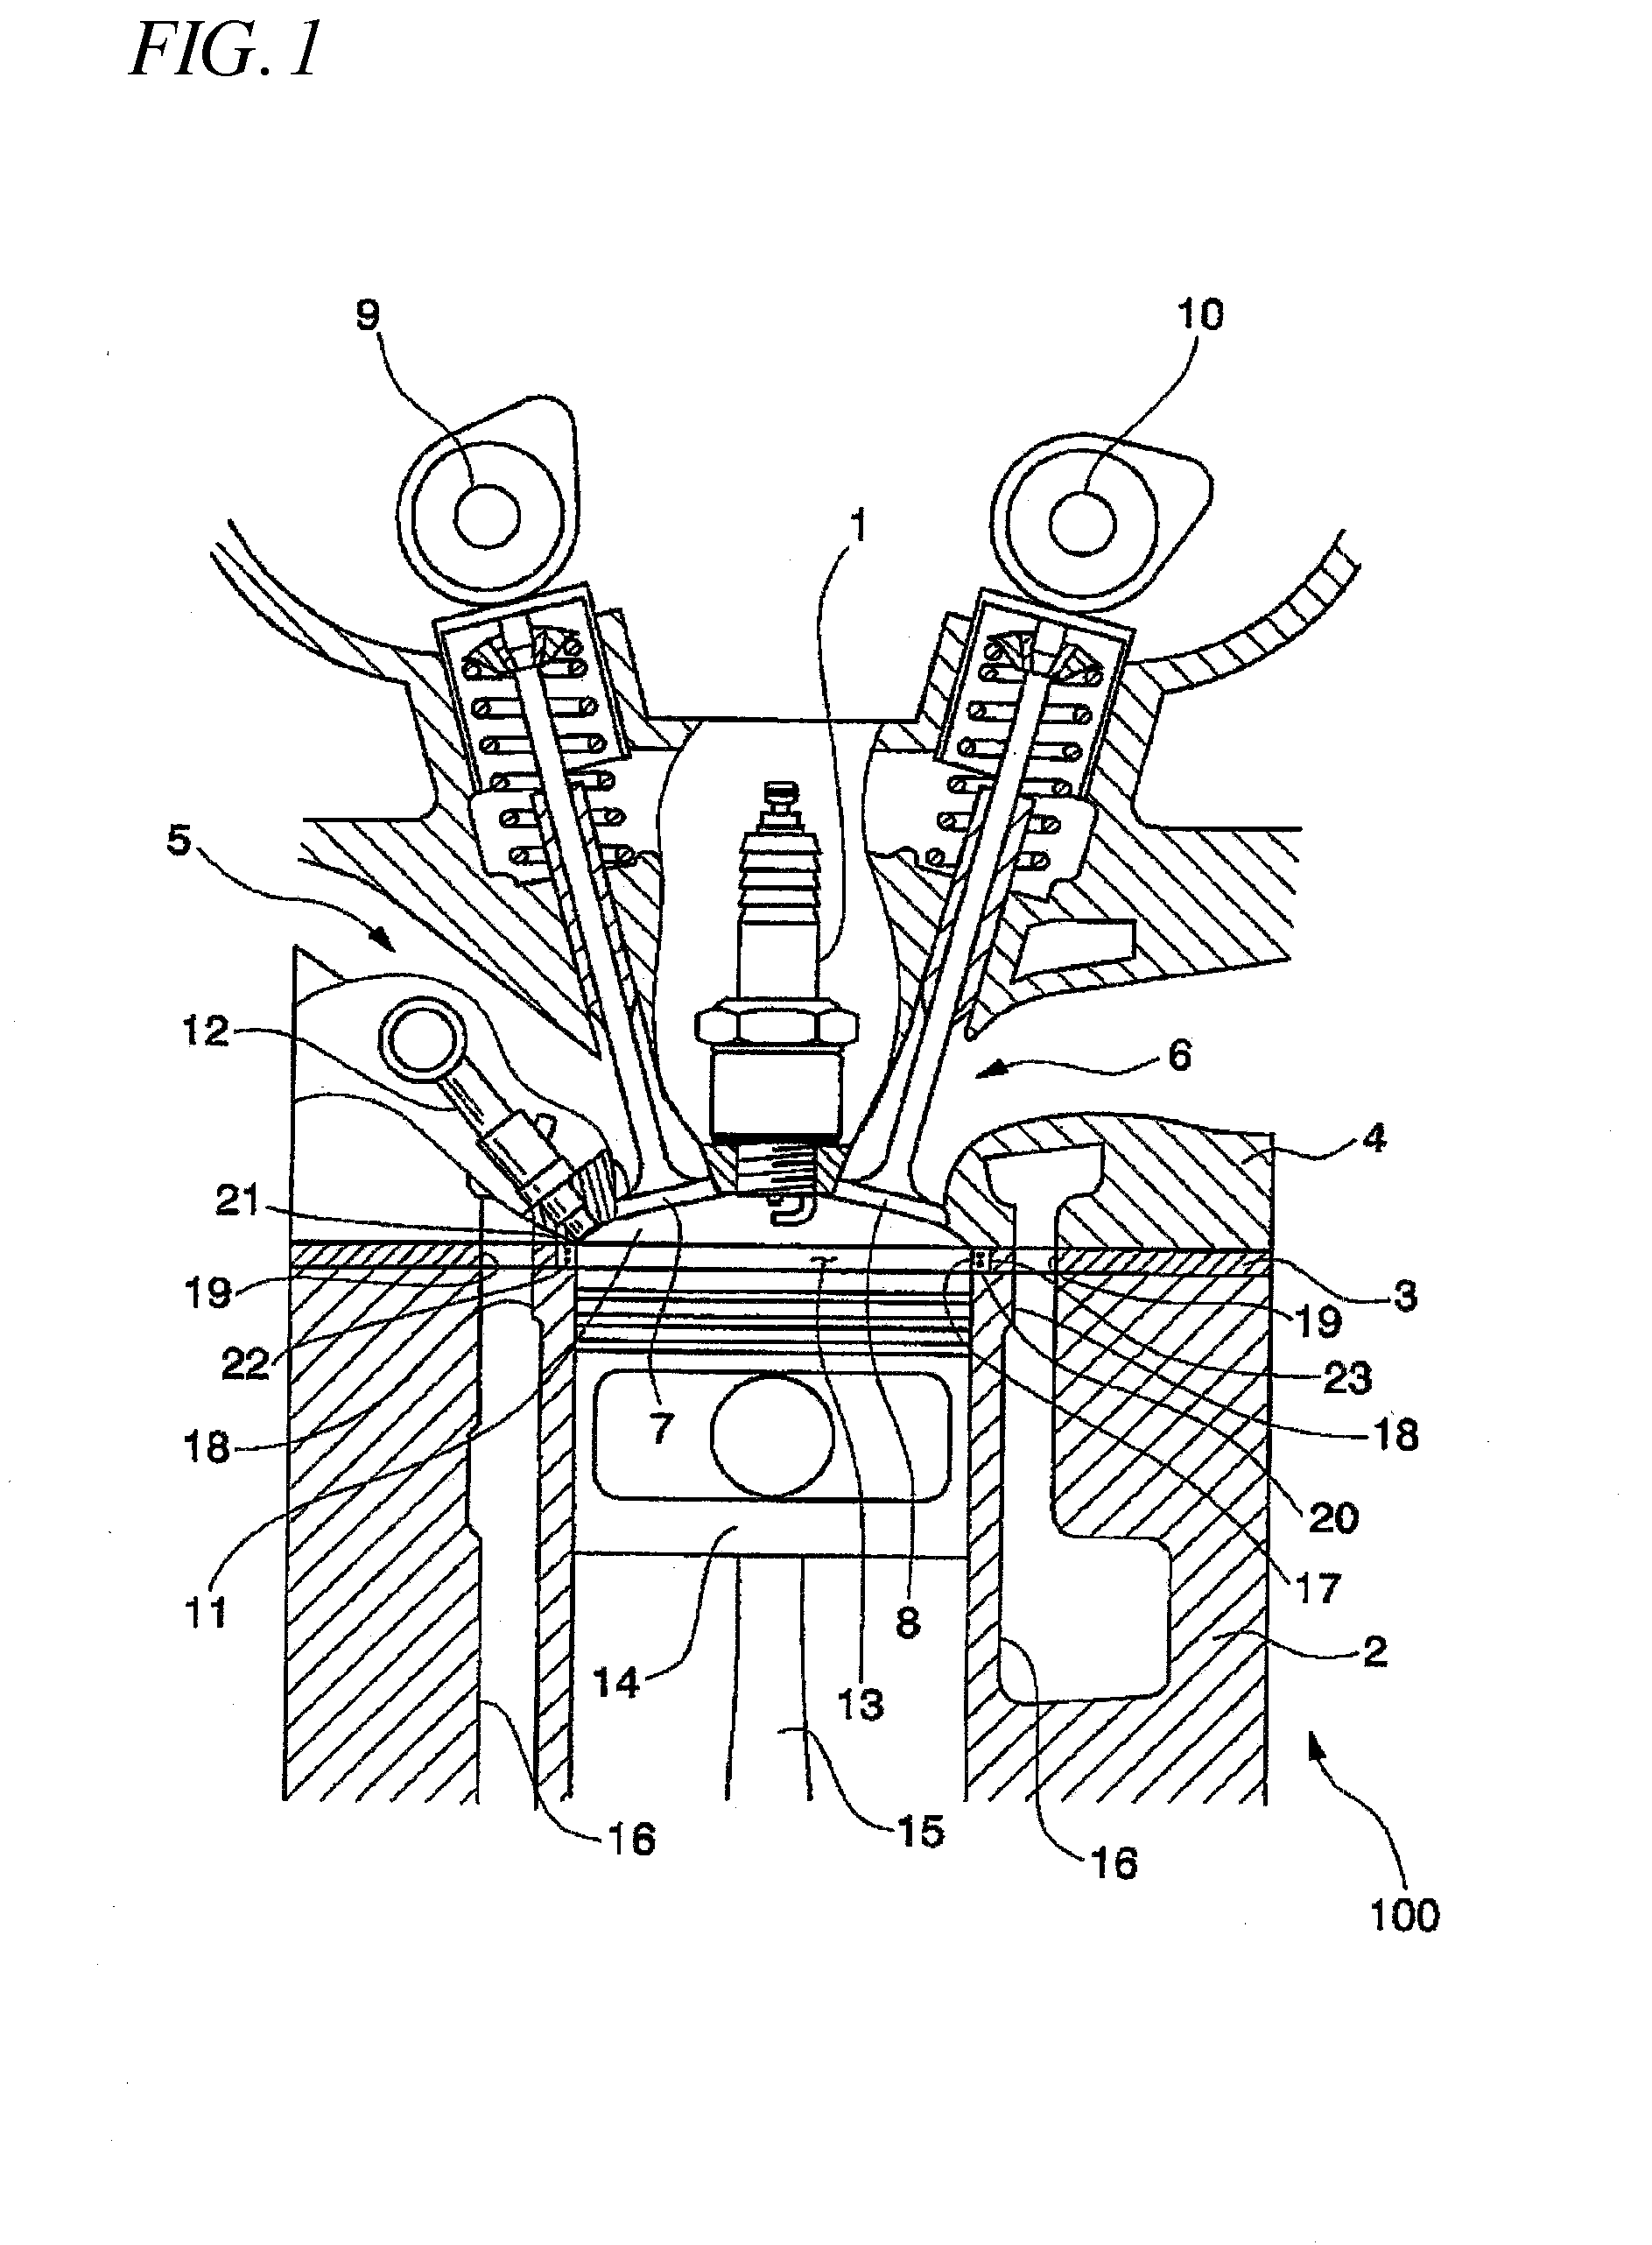 Barrier discharge device